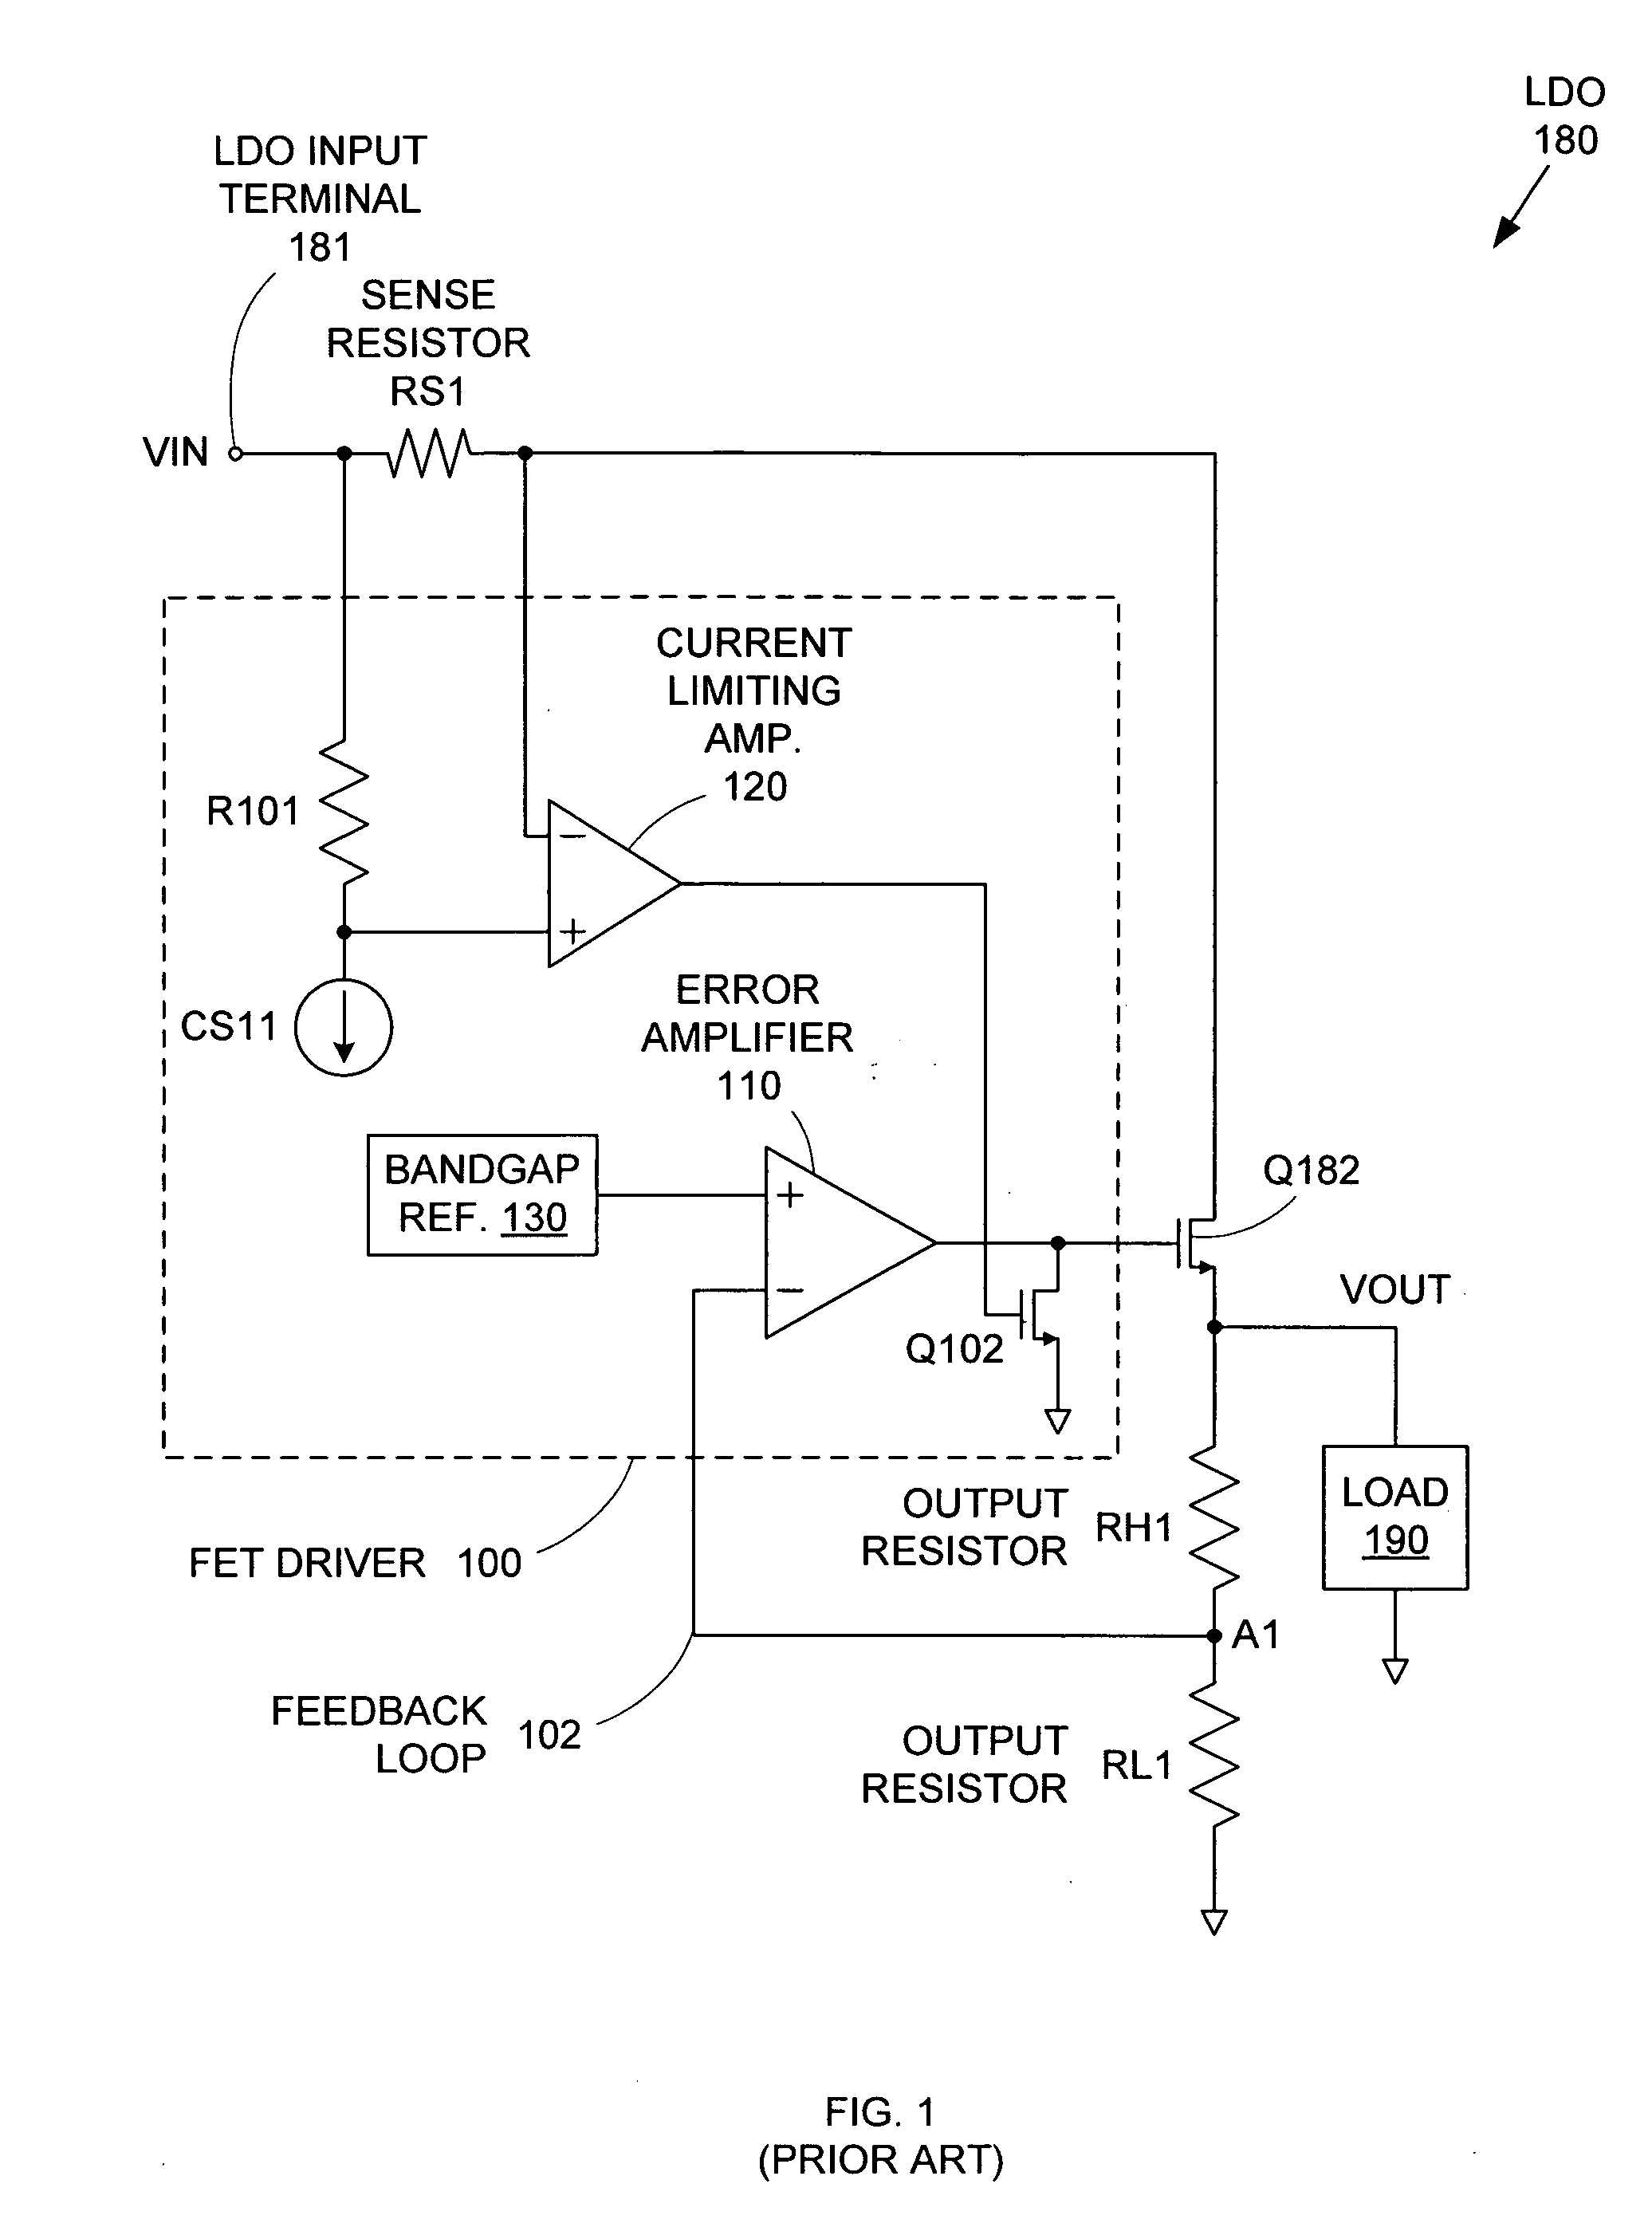 Current-limiting circuitry